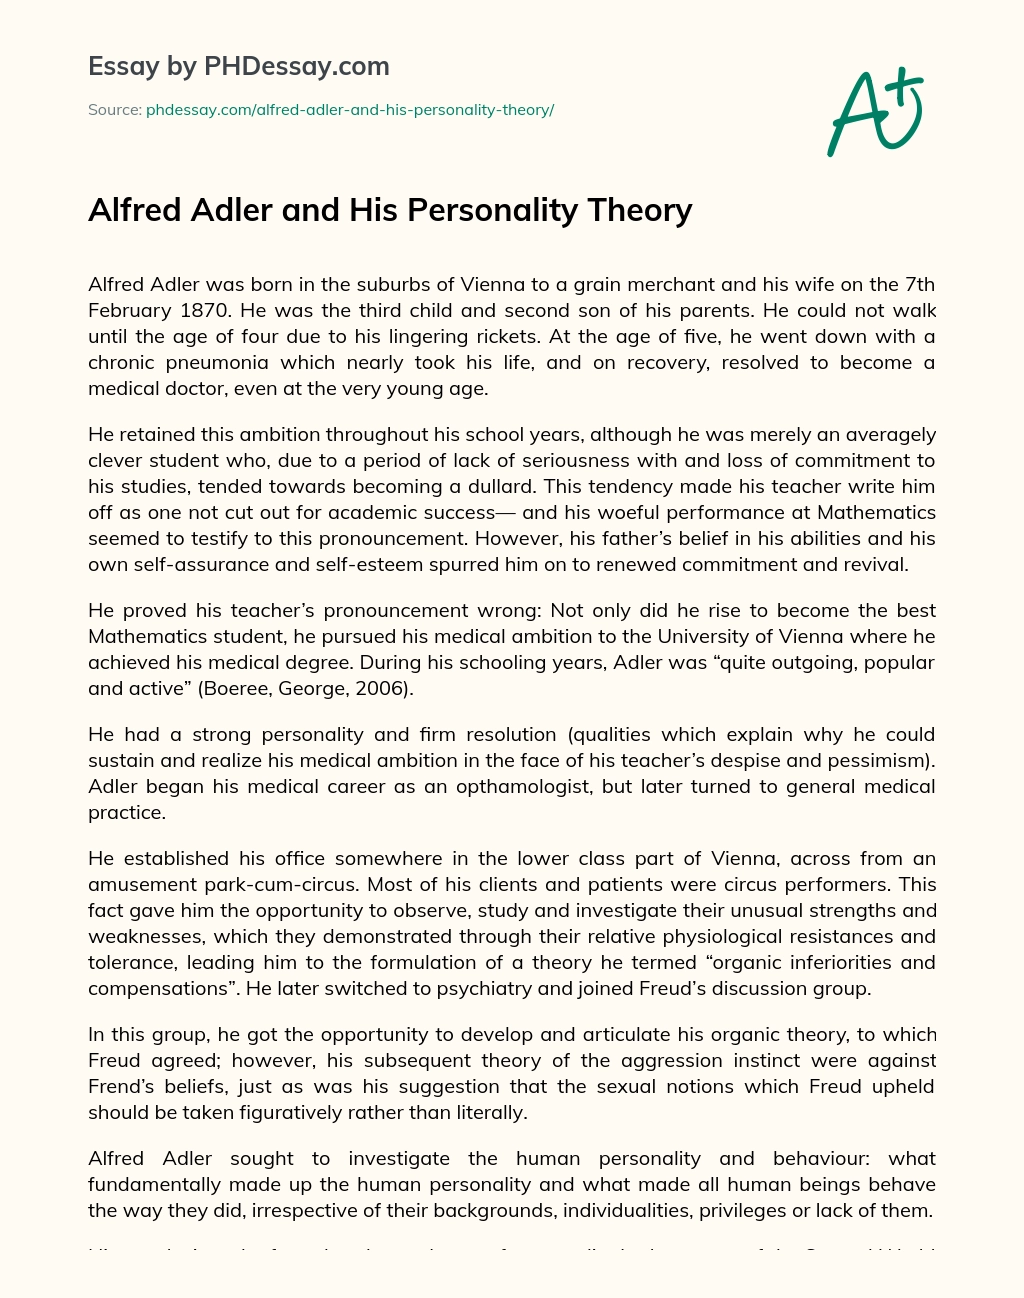 Alfred Adler and His Personality Theory essay